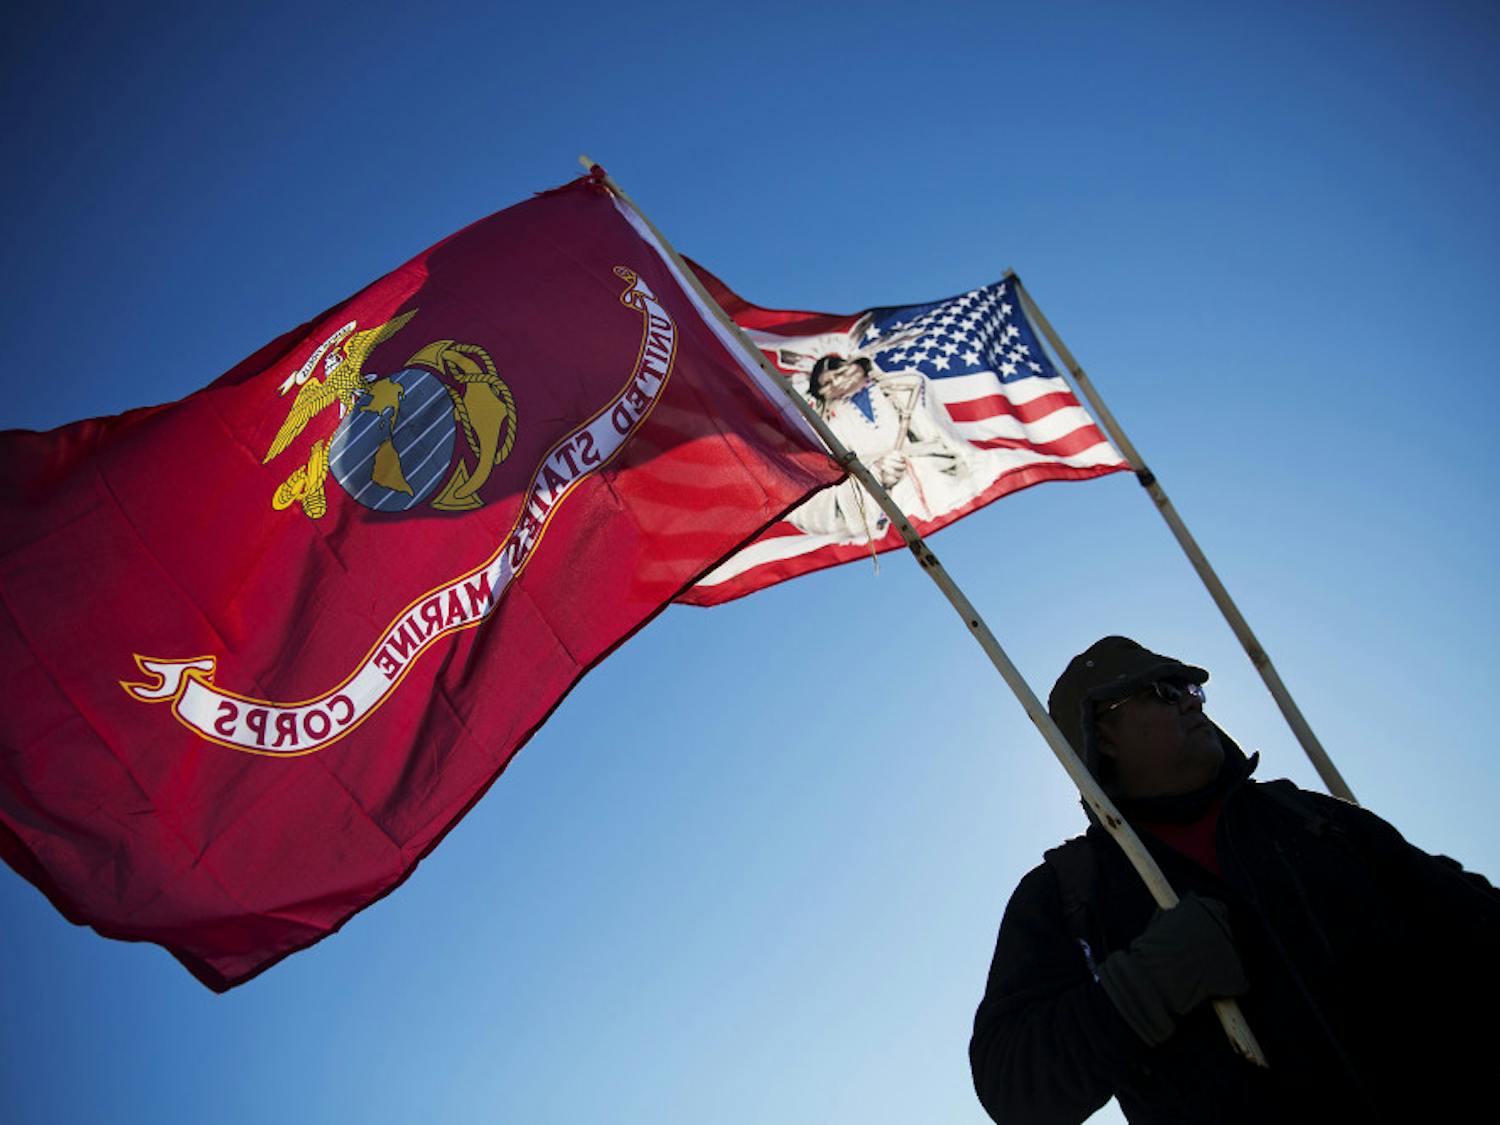 Marine Corps veteran and Northern Paiute and Pit River Native American Audie Noneo, of Susanville, Calif., holds the Marine Corps flag at the Oceti Sakowin camp where people have gathered to protest the Dakota Access oil pipeline in Cannon Ball, N.D., Sunday, Dec. 4, 2016. The U.S. Army Corps of Engineers said Sunday it won't grant easement for the Dakota Access oil pipeline in southern North Dakota.